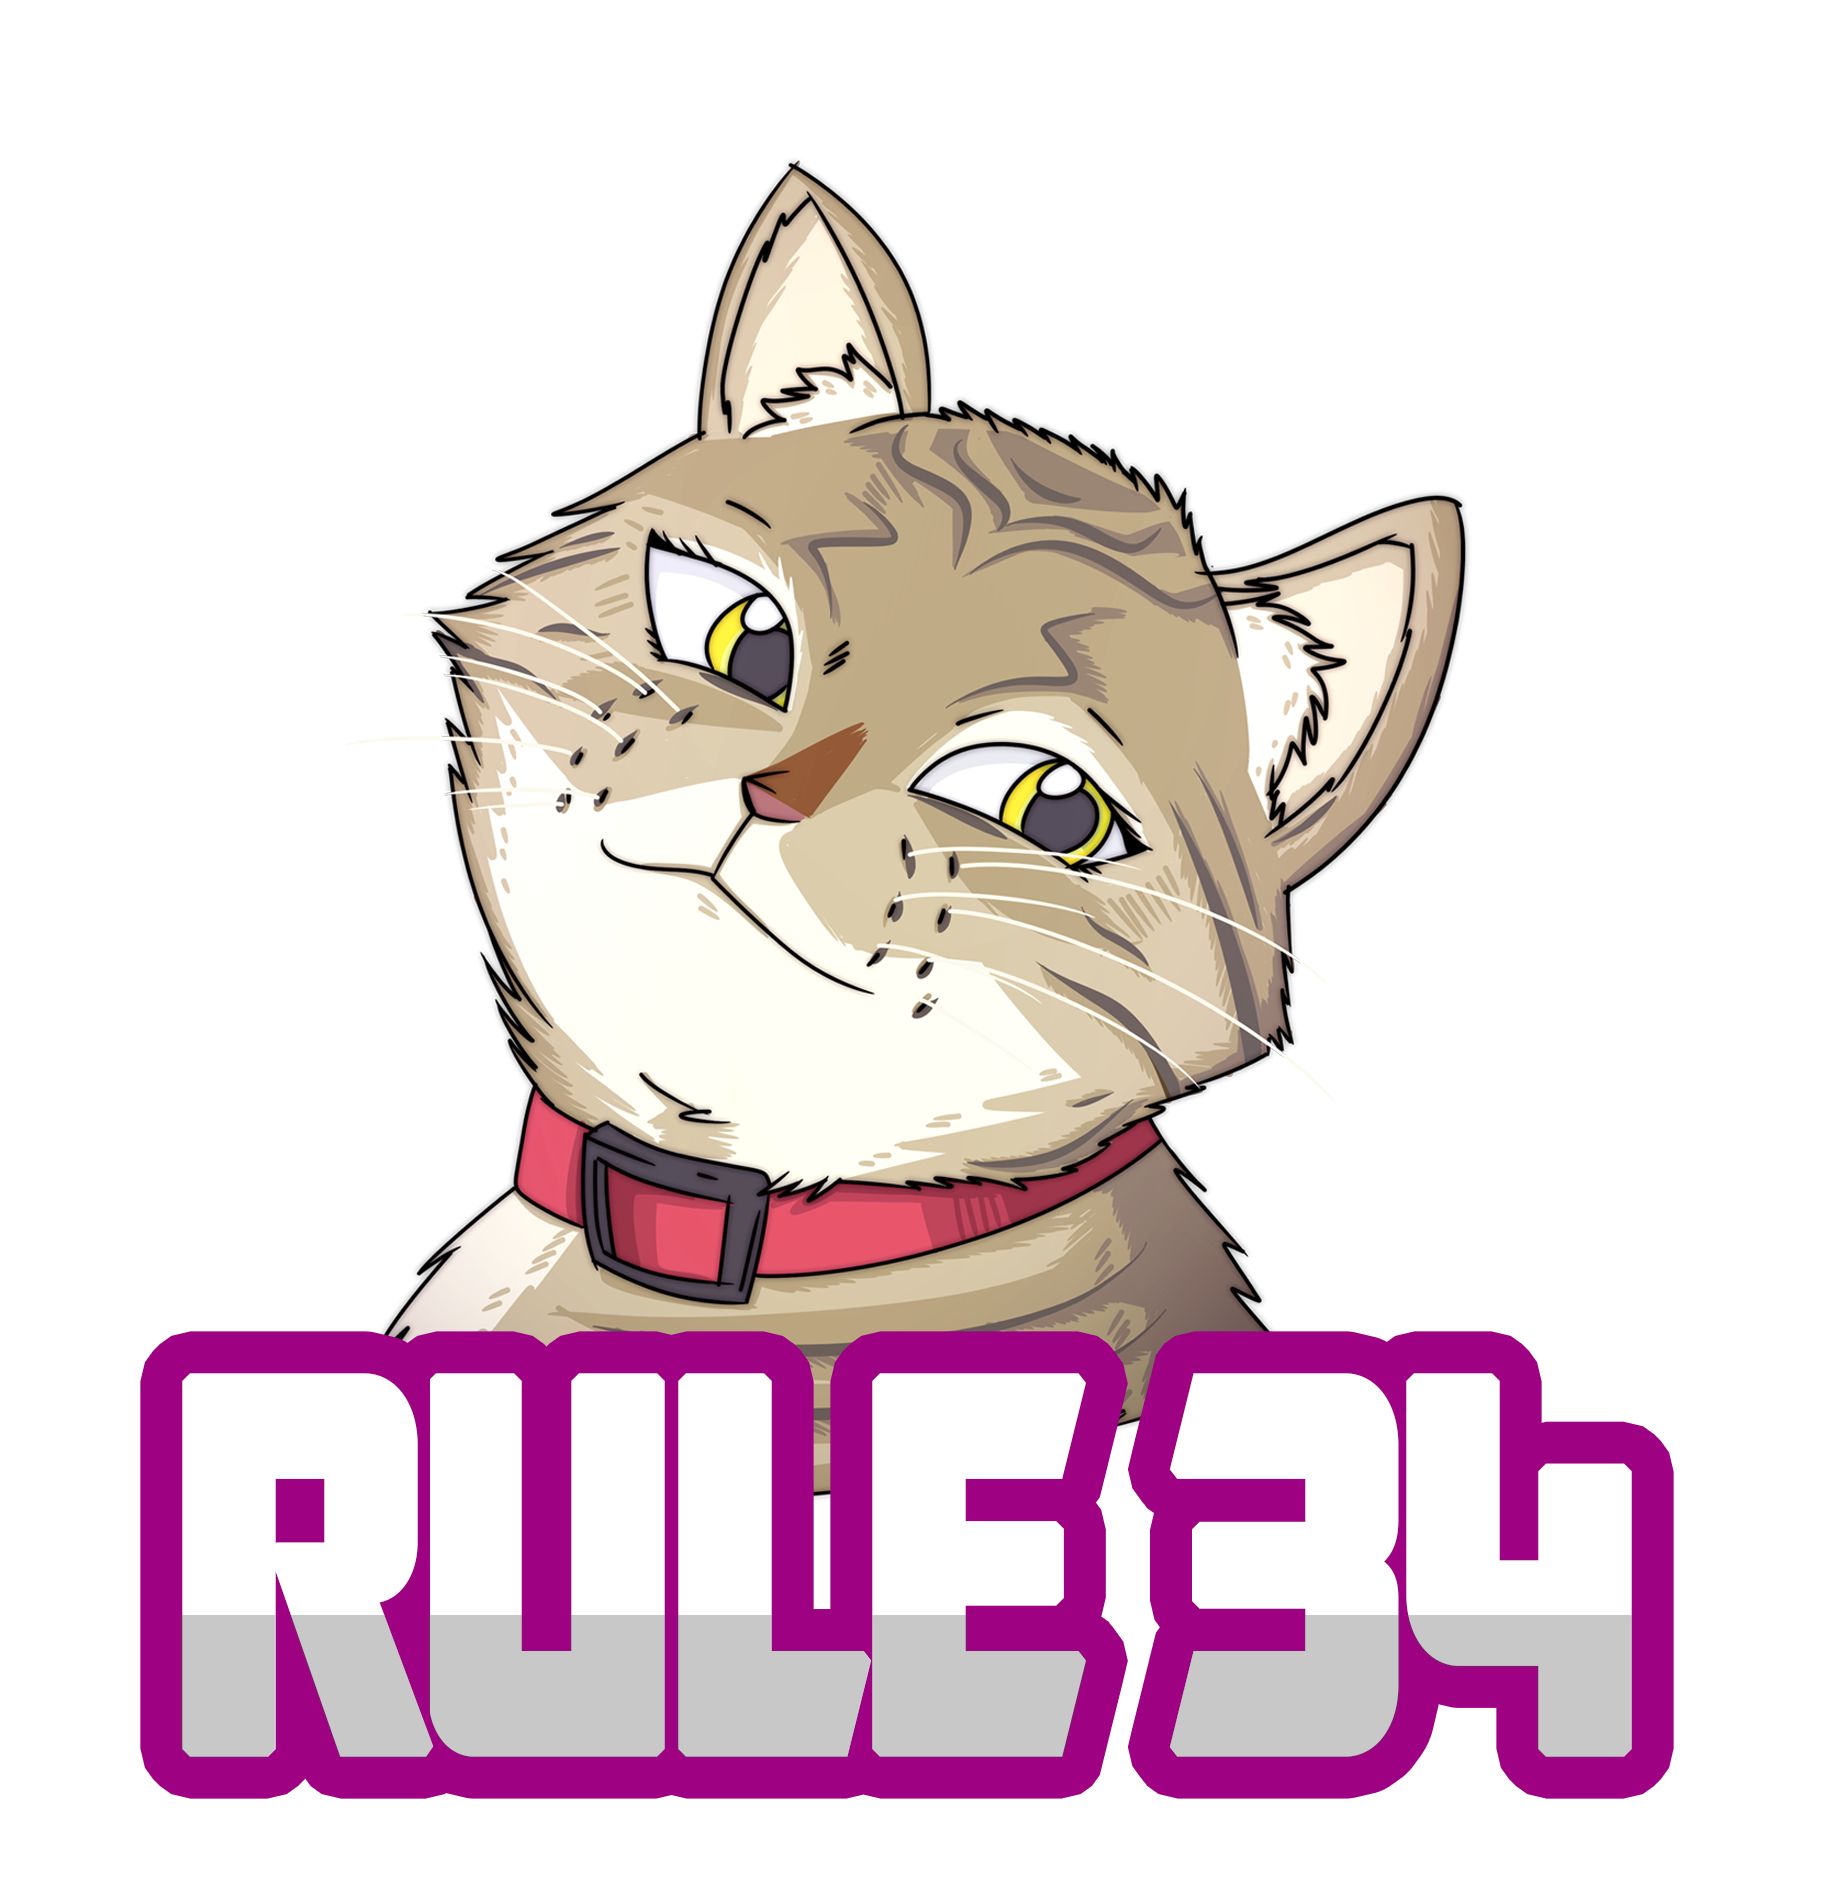 Rule 34 Pictures